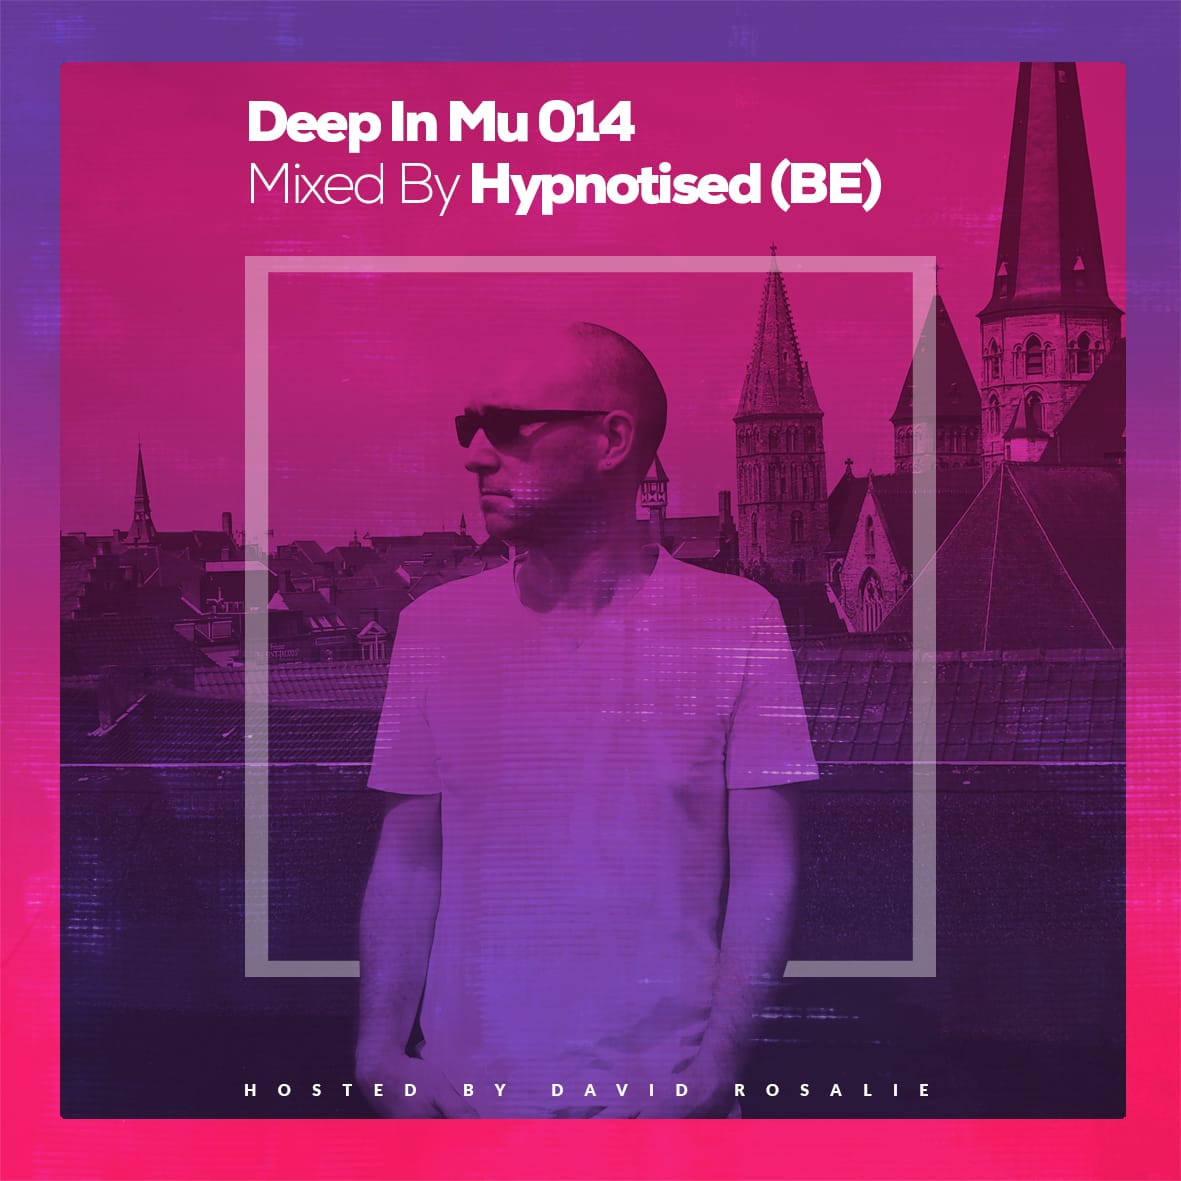 Deep In Mu 014 Mixed By Hypnotised (BE)